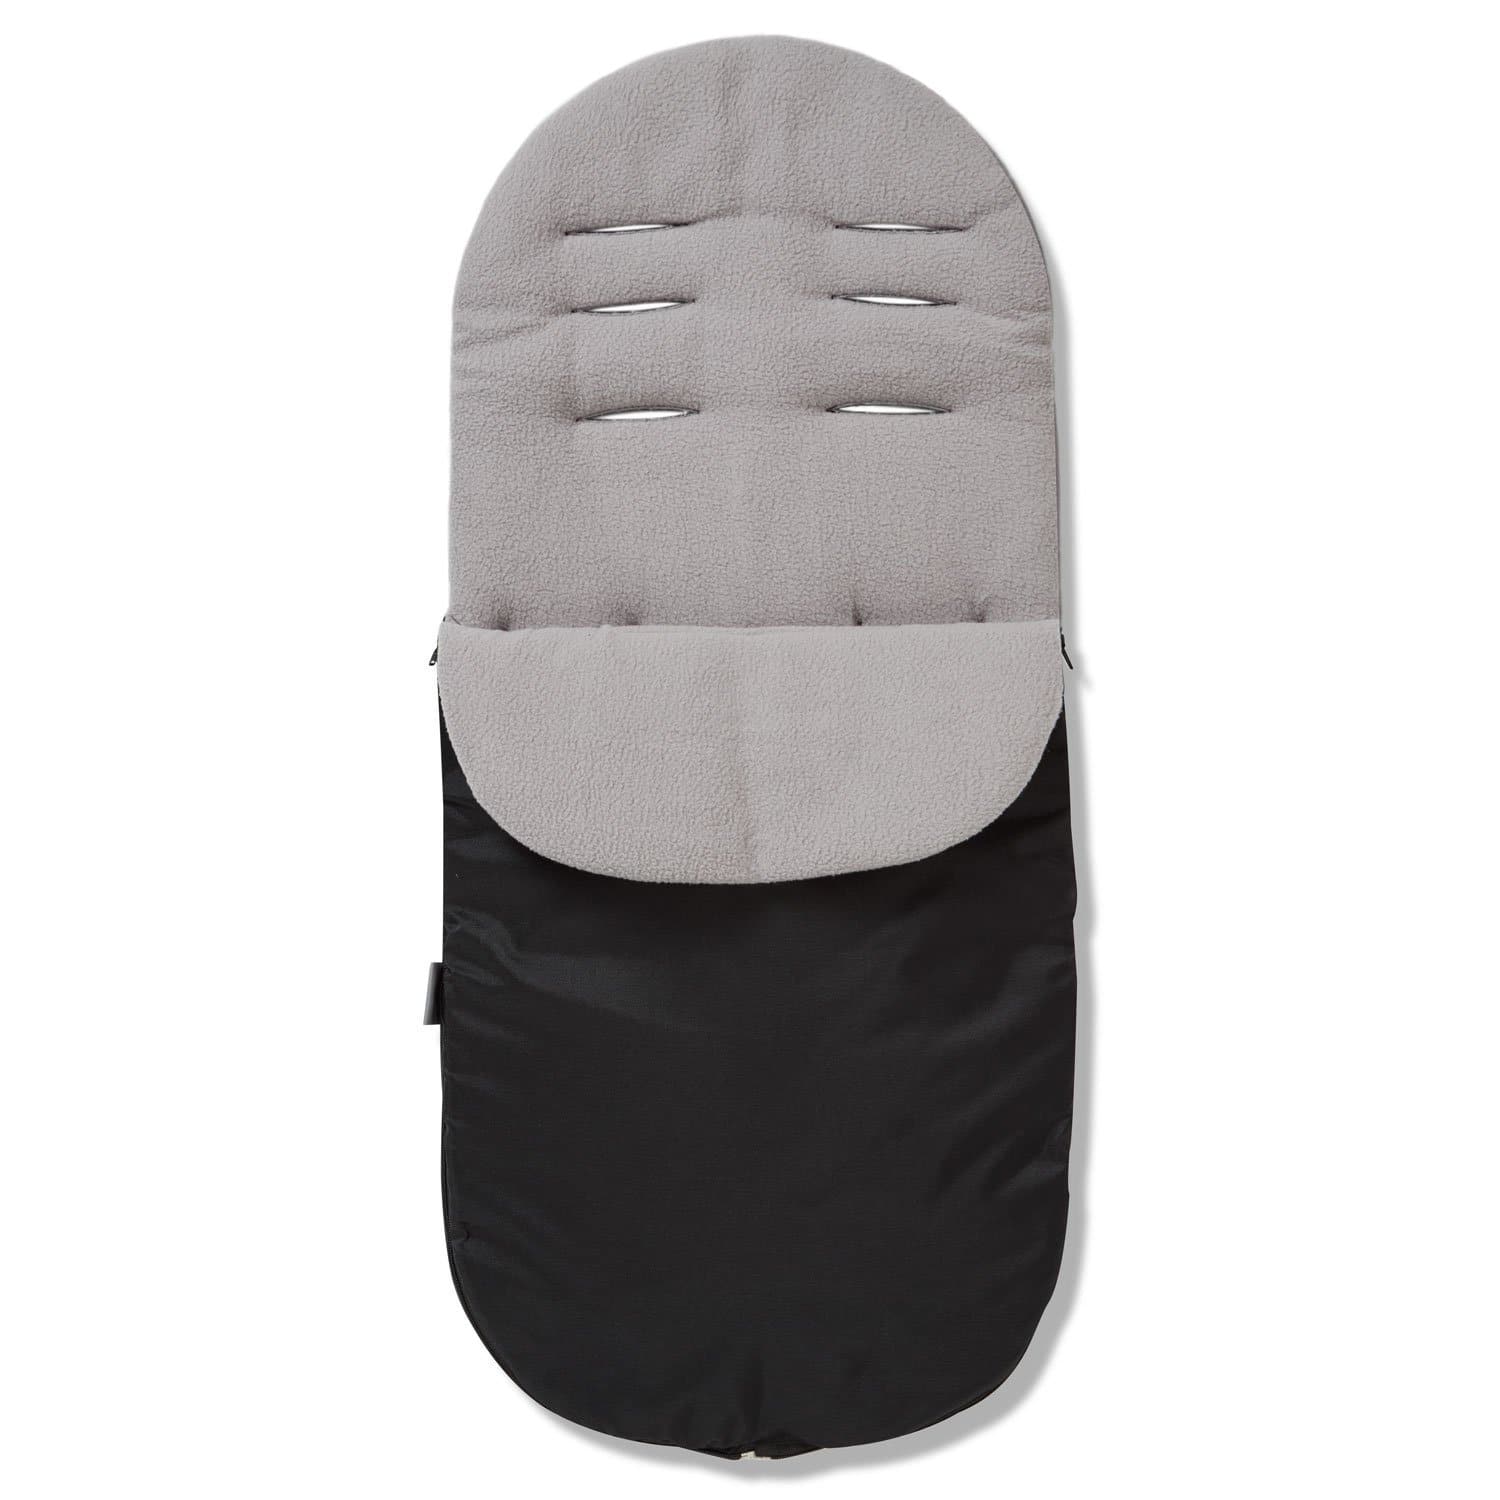 Footmuff / Cosy Toes Compatible with Joolz - Grey / Fits All Models | For Your Little One